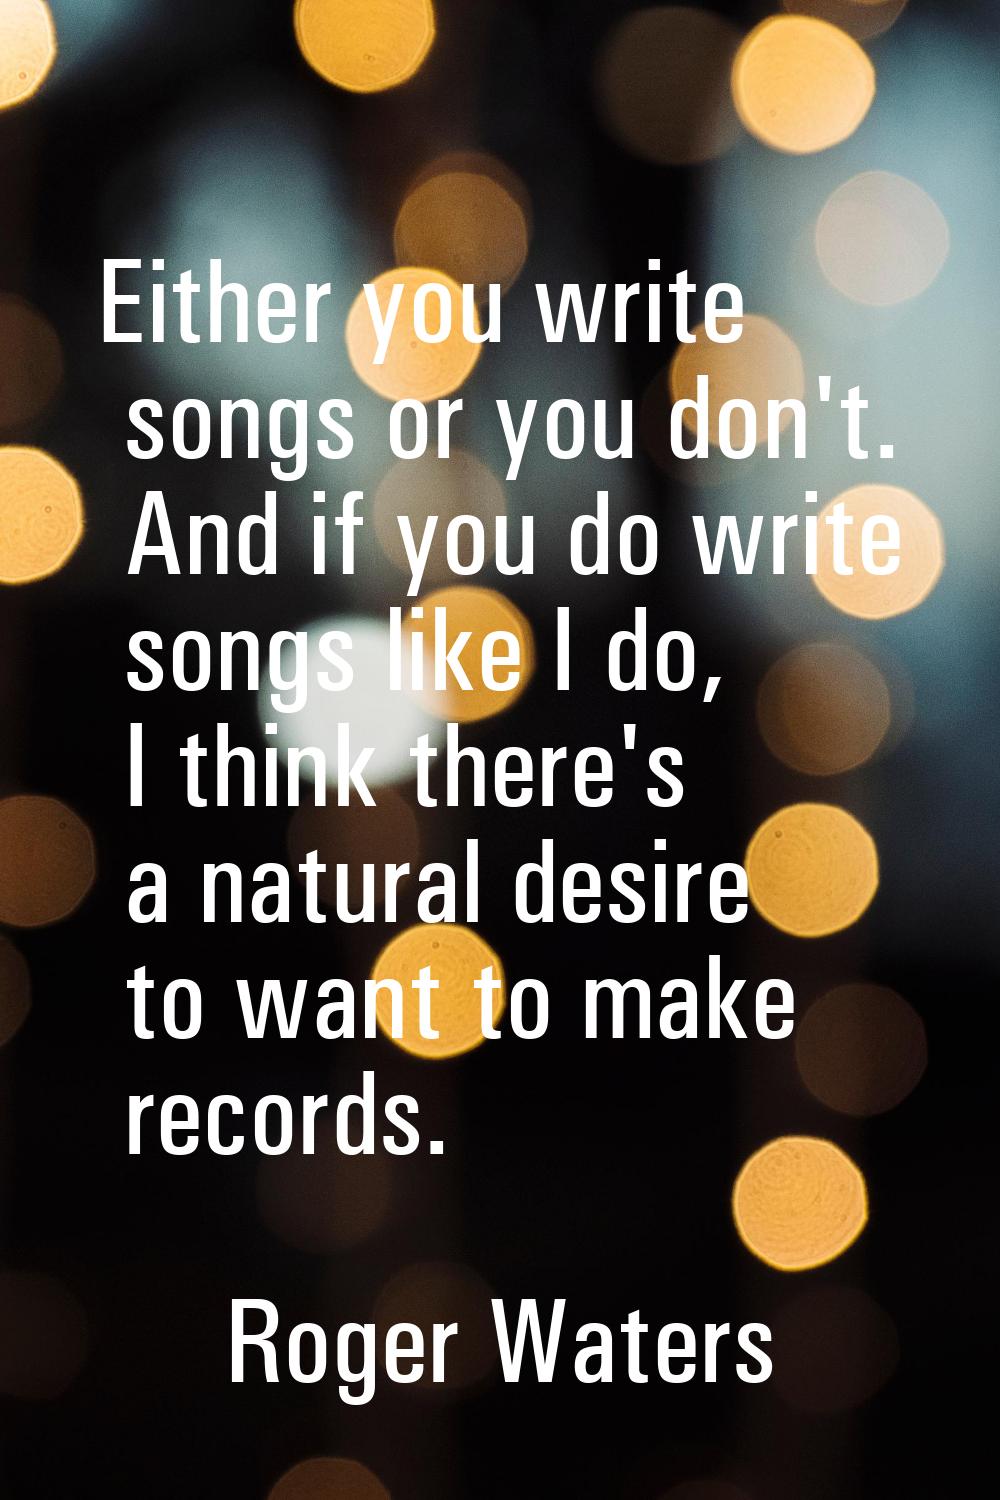 Either you write songs or you don't. And if you do write songs like I do, I think there's a natural